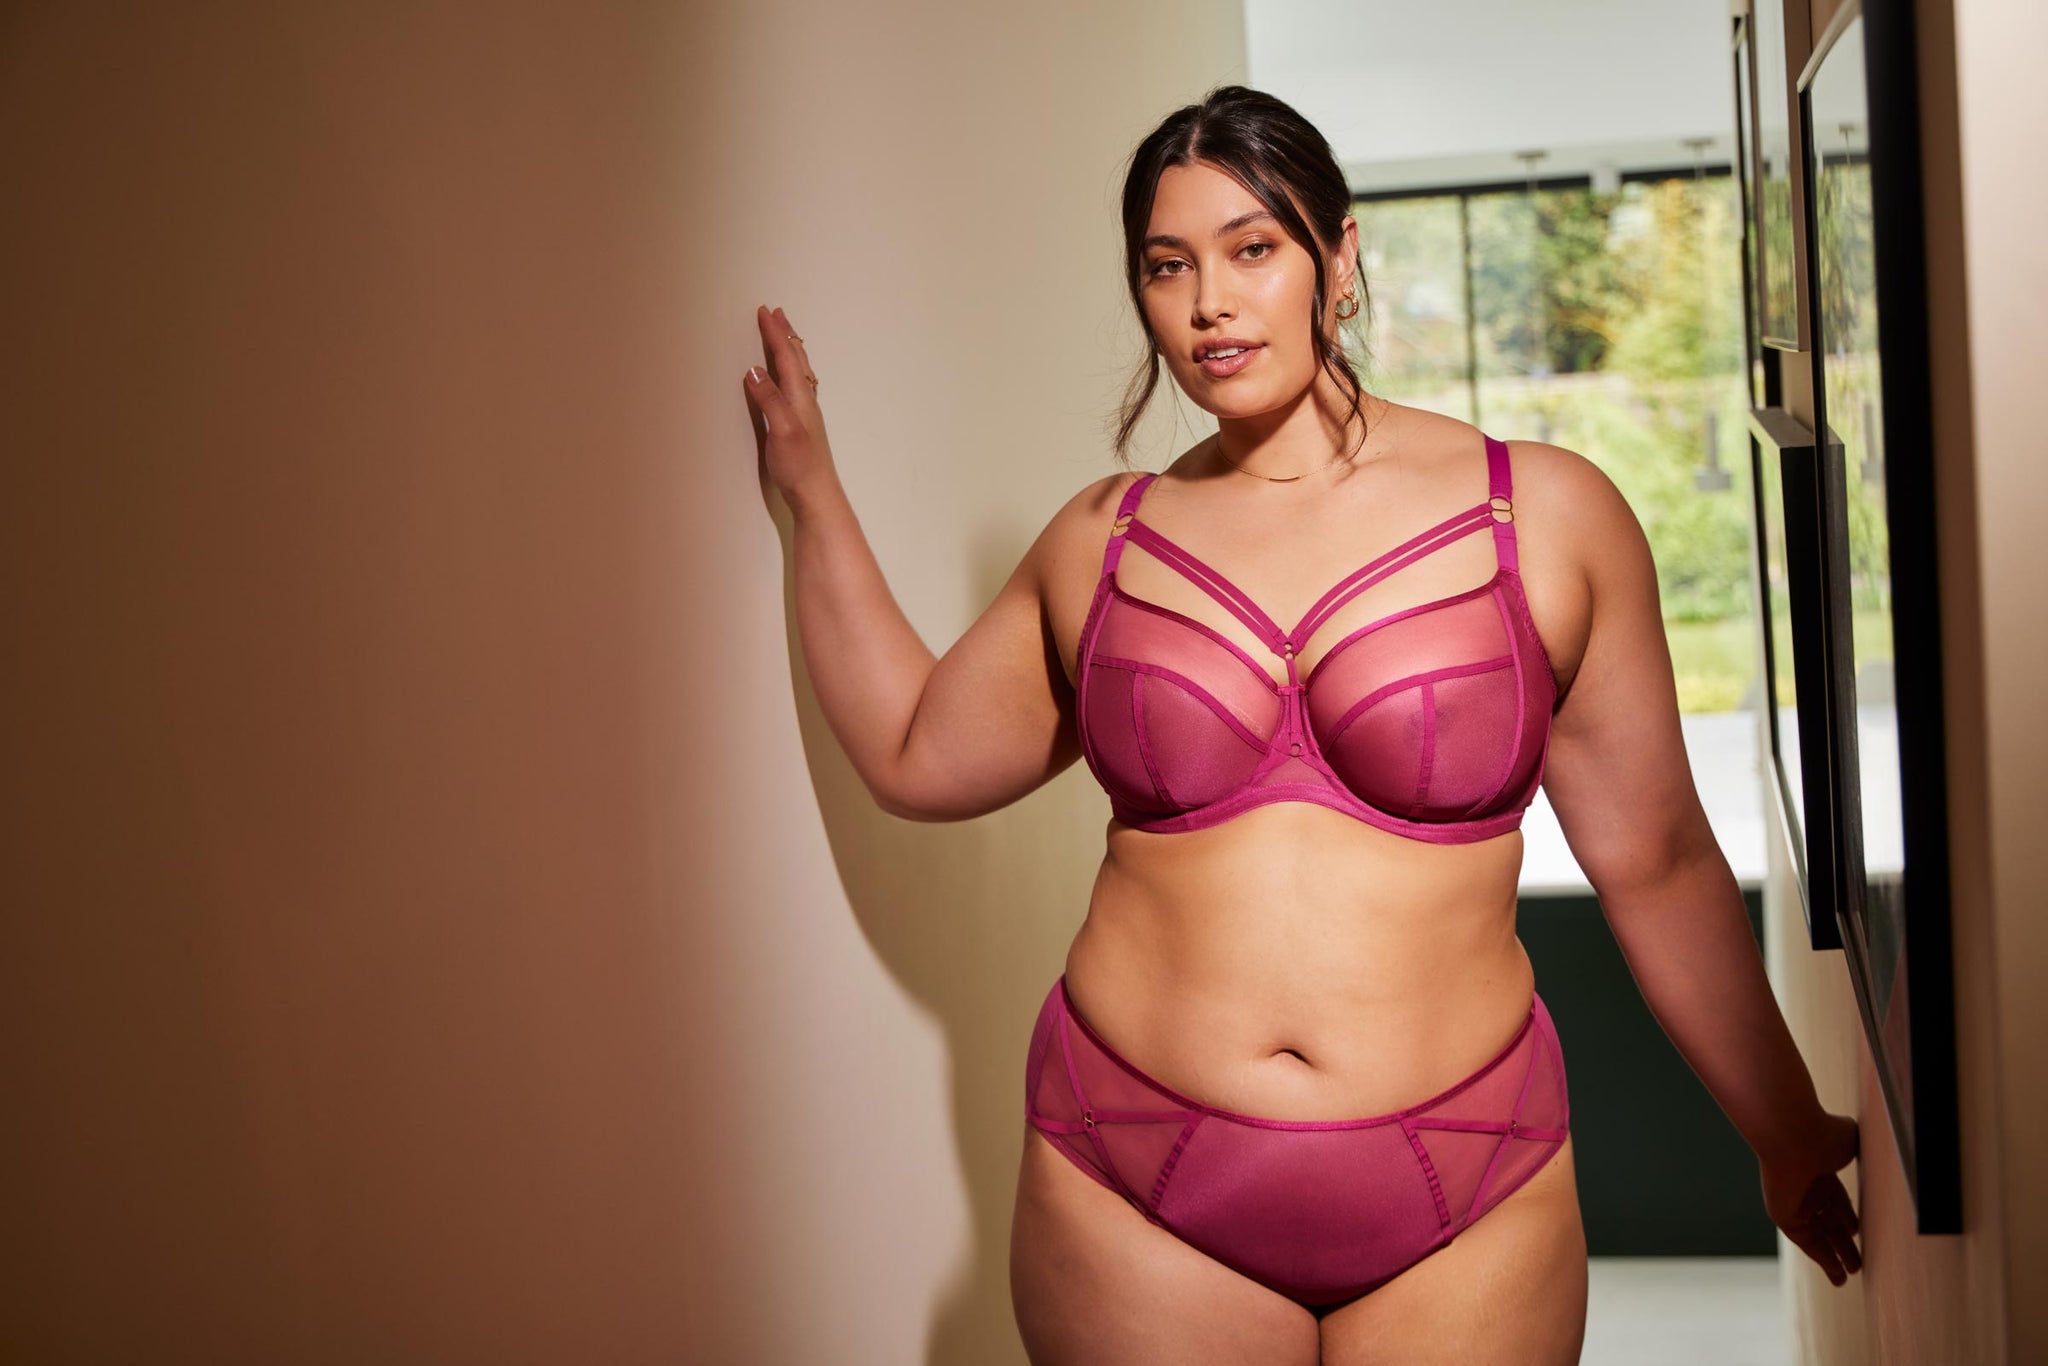 Top 10 Best Bras For Large Breasts